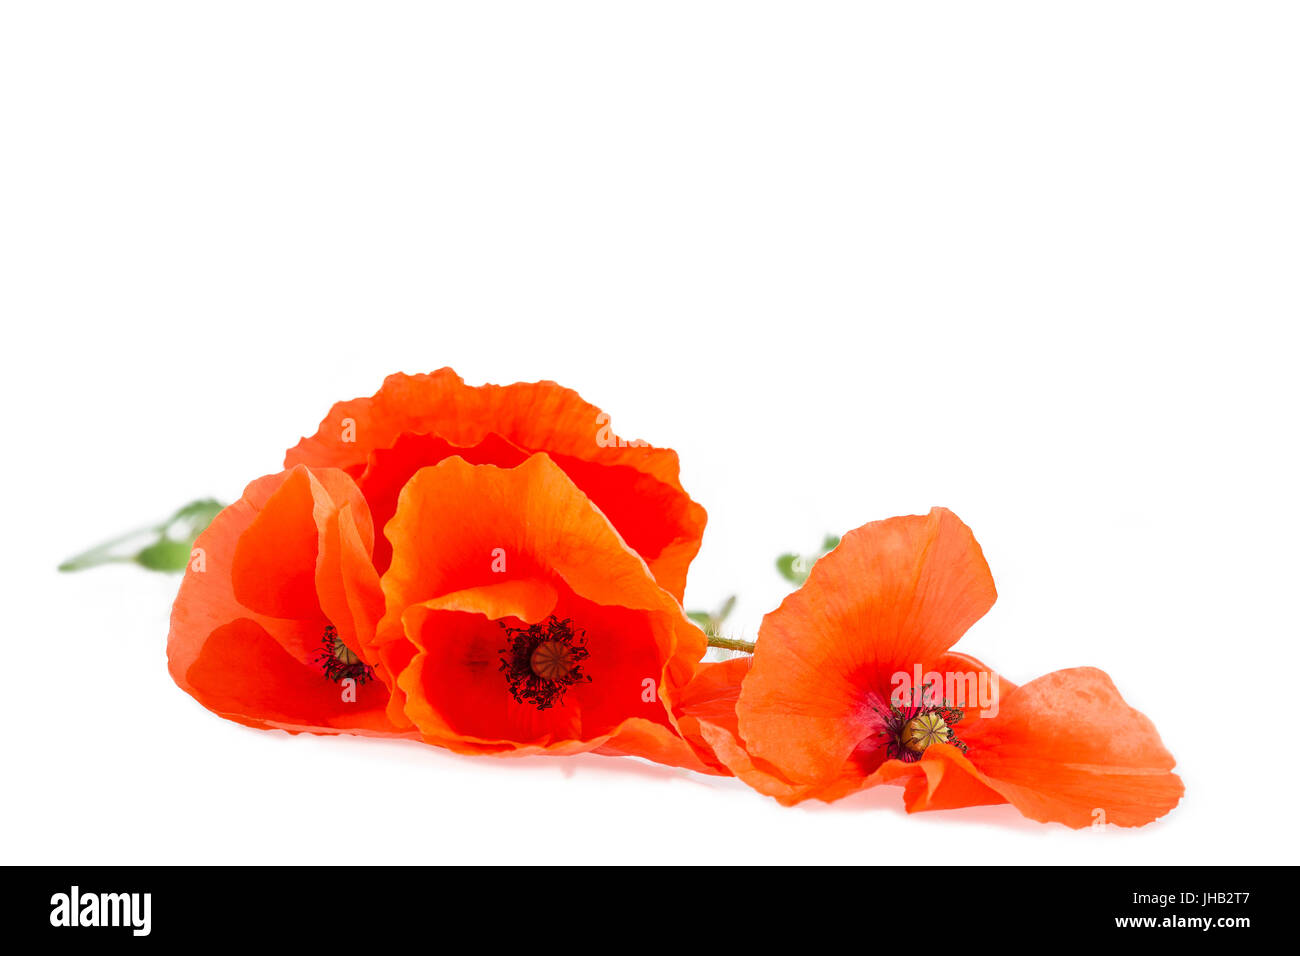 Red poppies lying on the white table background Stock Photo